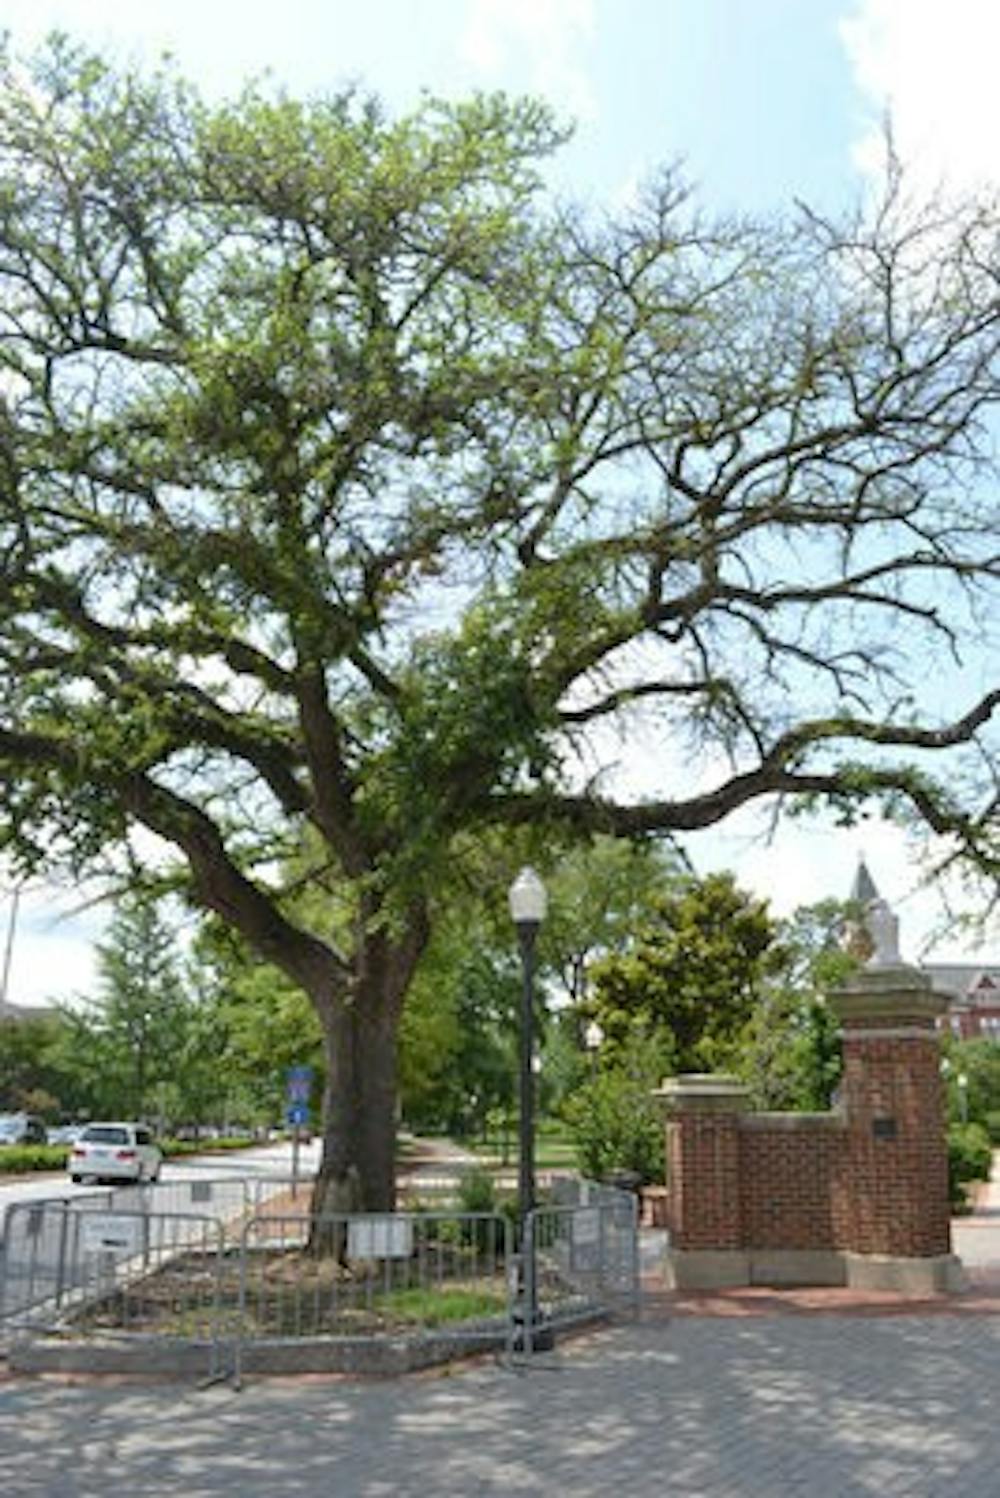 Toomer's Oaks were poisoned last January and have been receiving various treatments to attempt to reverse the effects. (Danielle Lowe / PHOTO EDITOR)